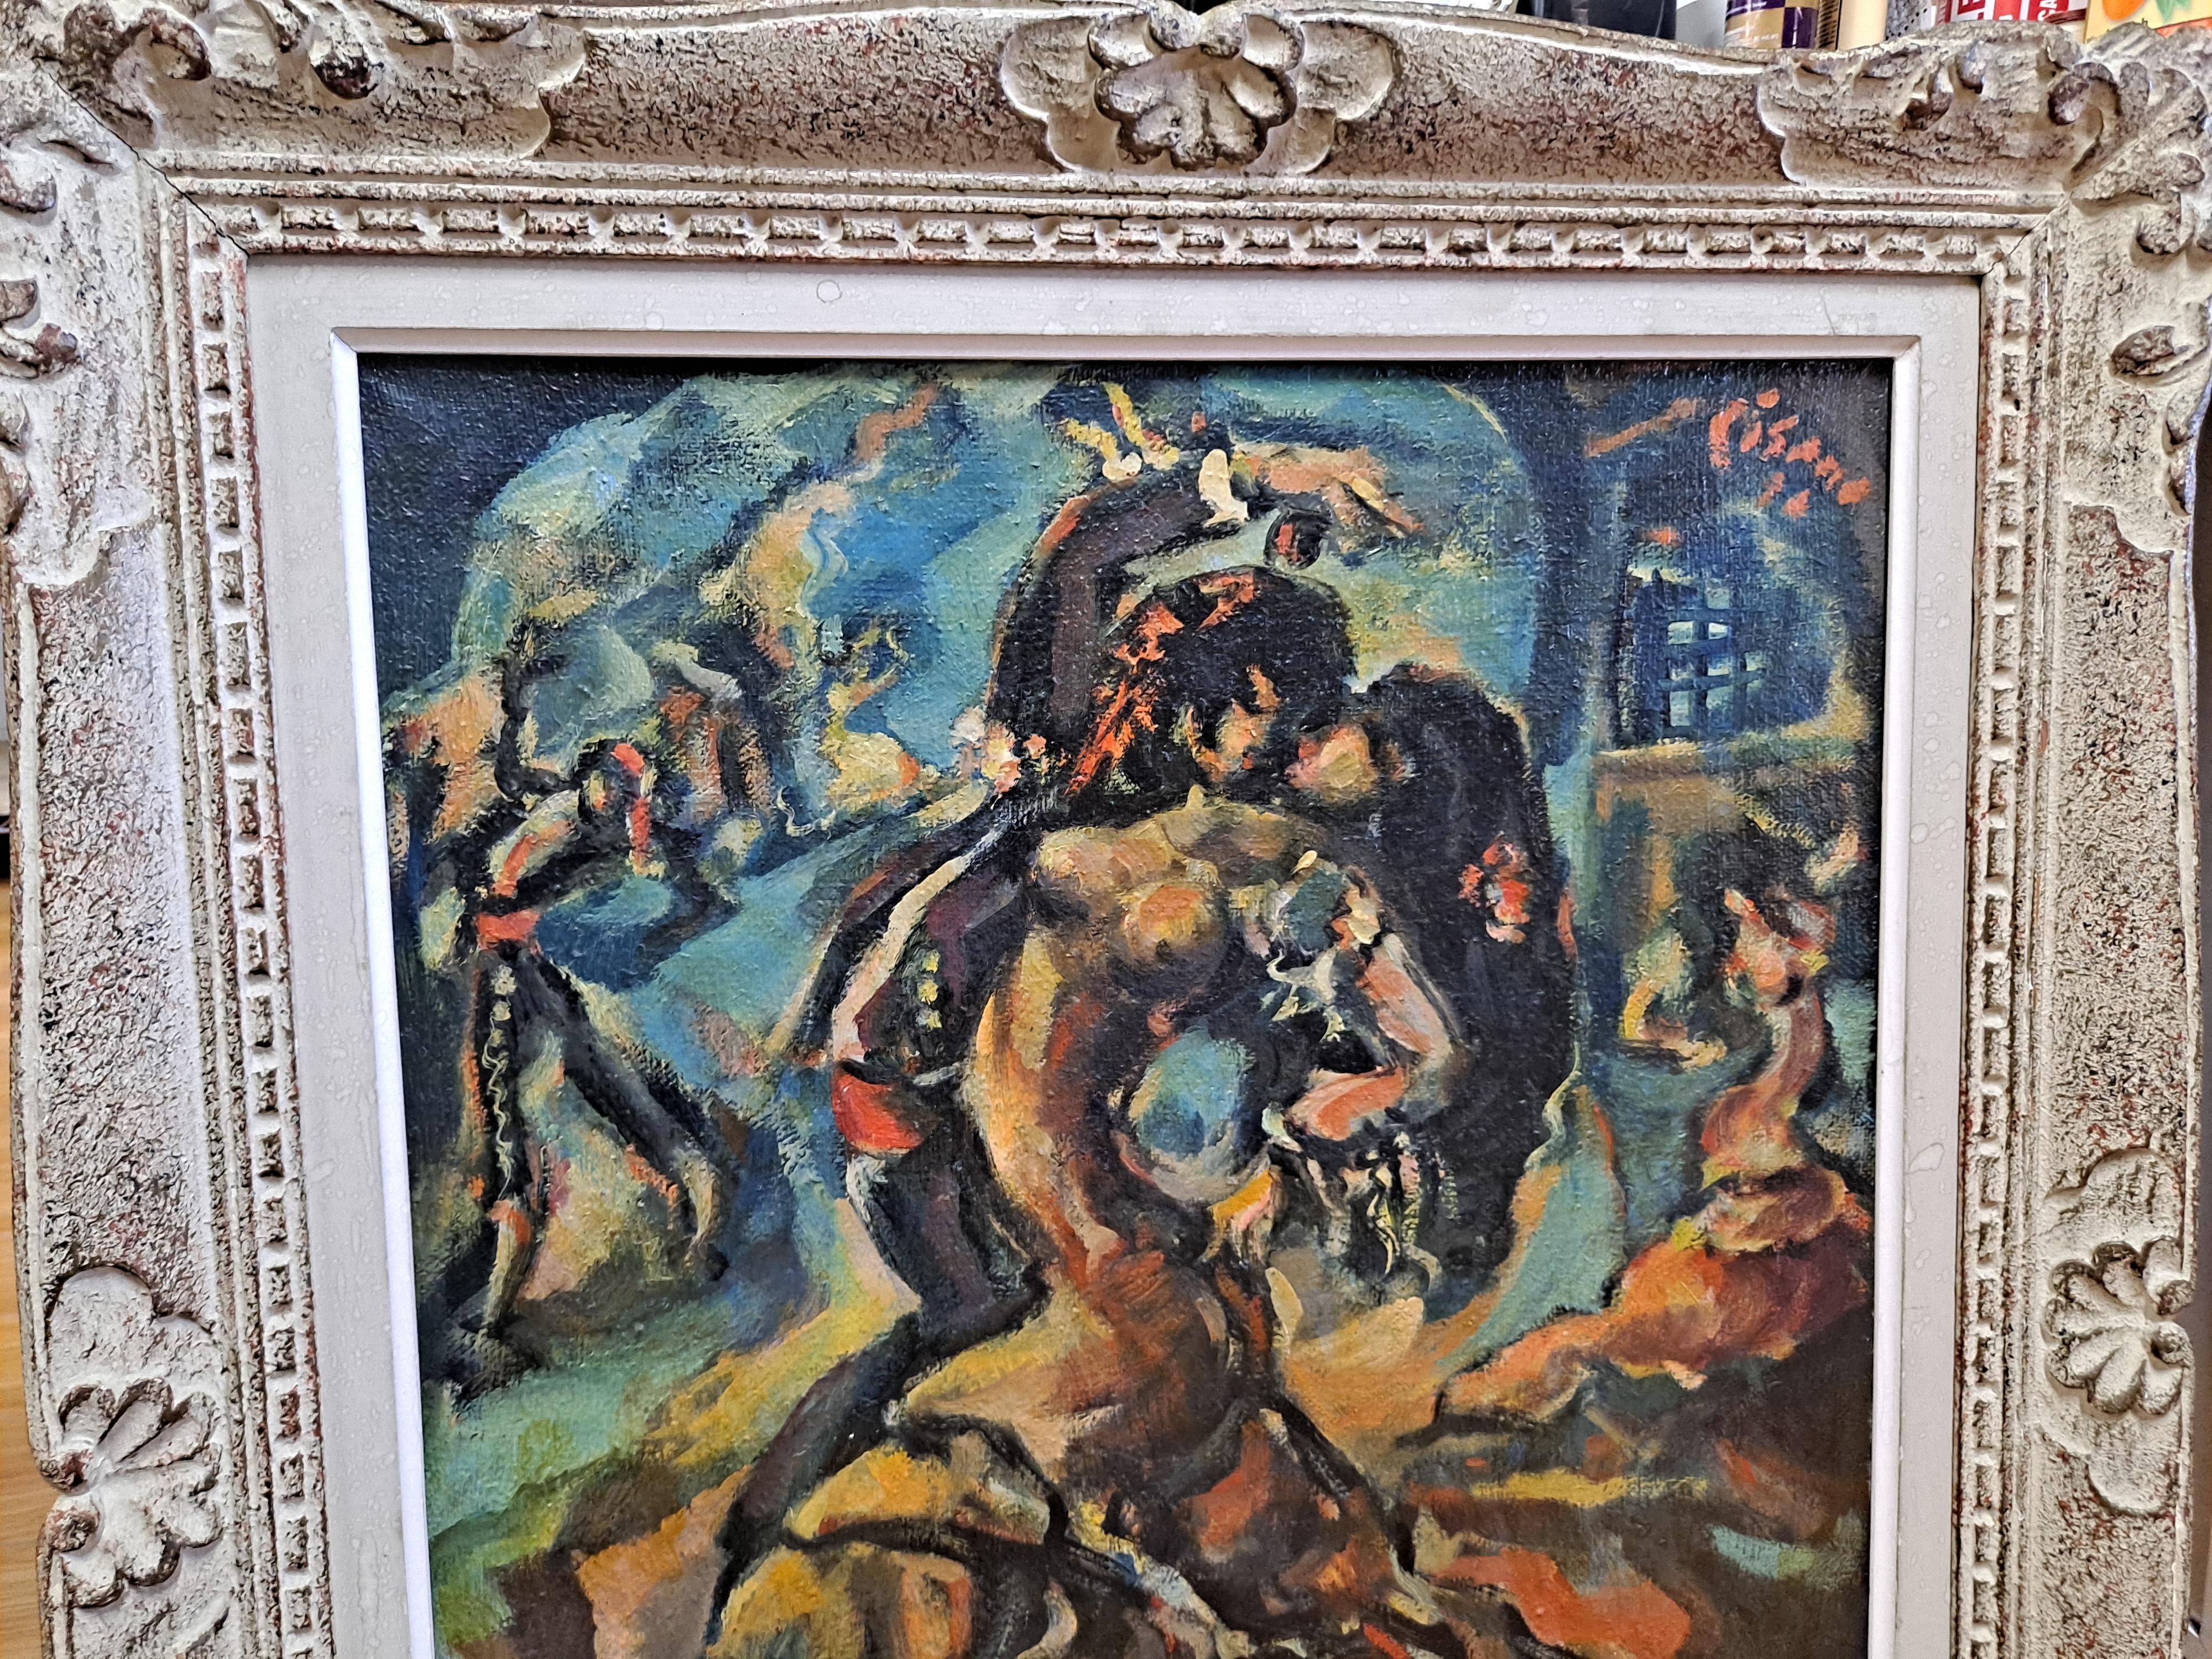 Beautiful oil painting of Spanish dancers by Eduardo Pisano
Circa 1950S-1960s
Oil on canvas

The painting measures 18